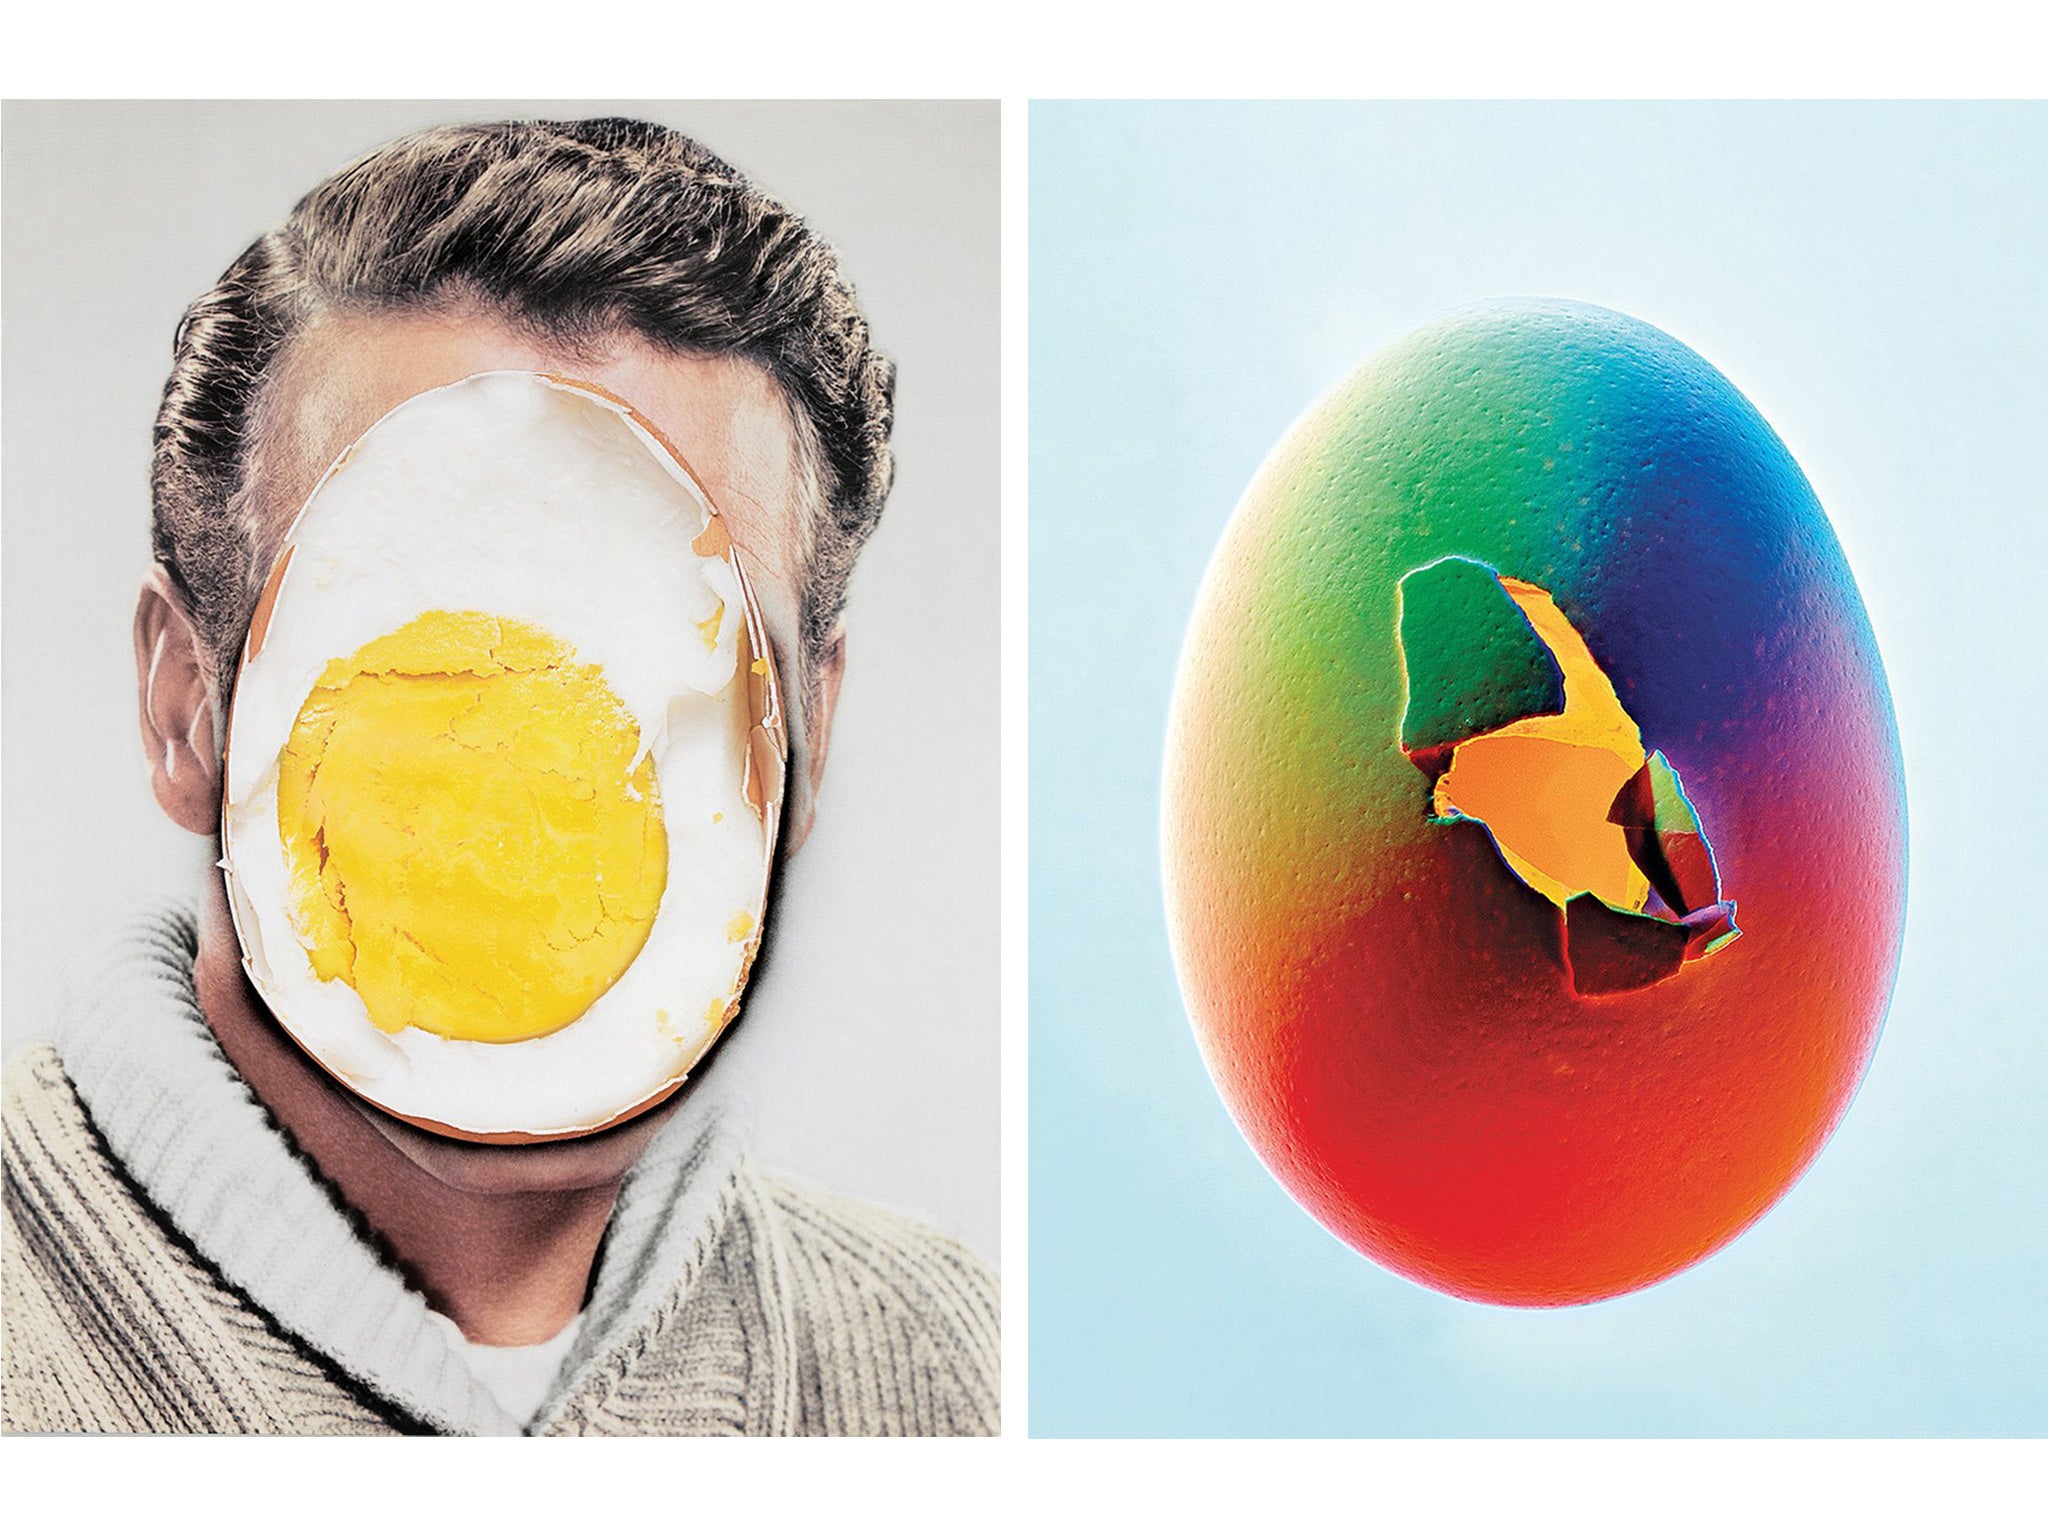 Urs Fischer, ‘Half a Problem’, 2013, left, and Bobby Doherty, ‘Rainbow Egg’, 2014